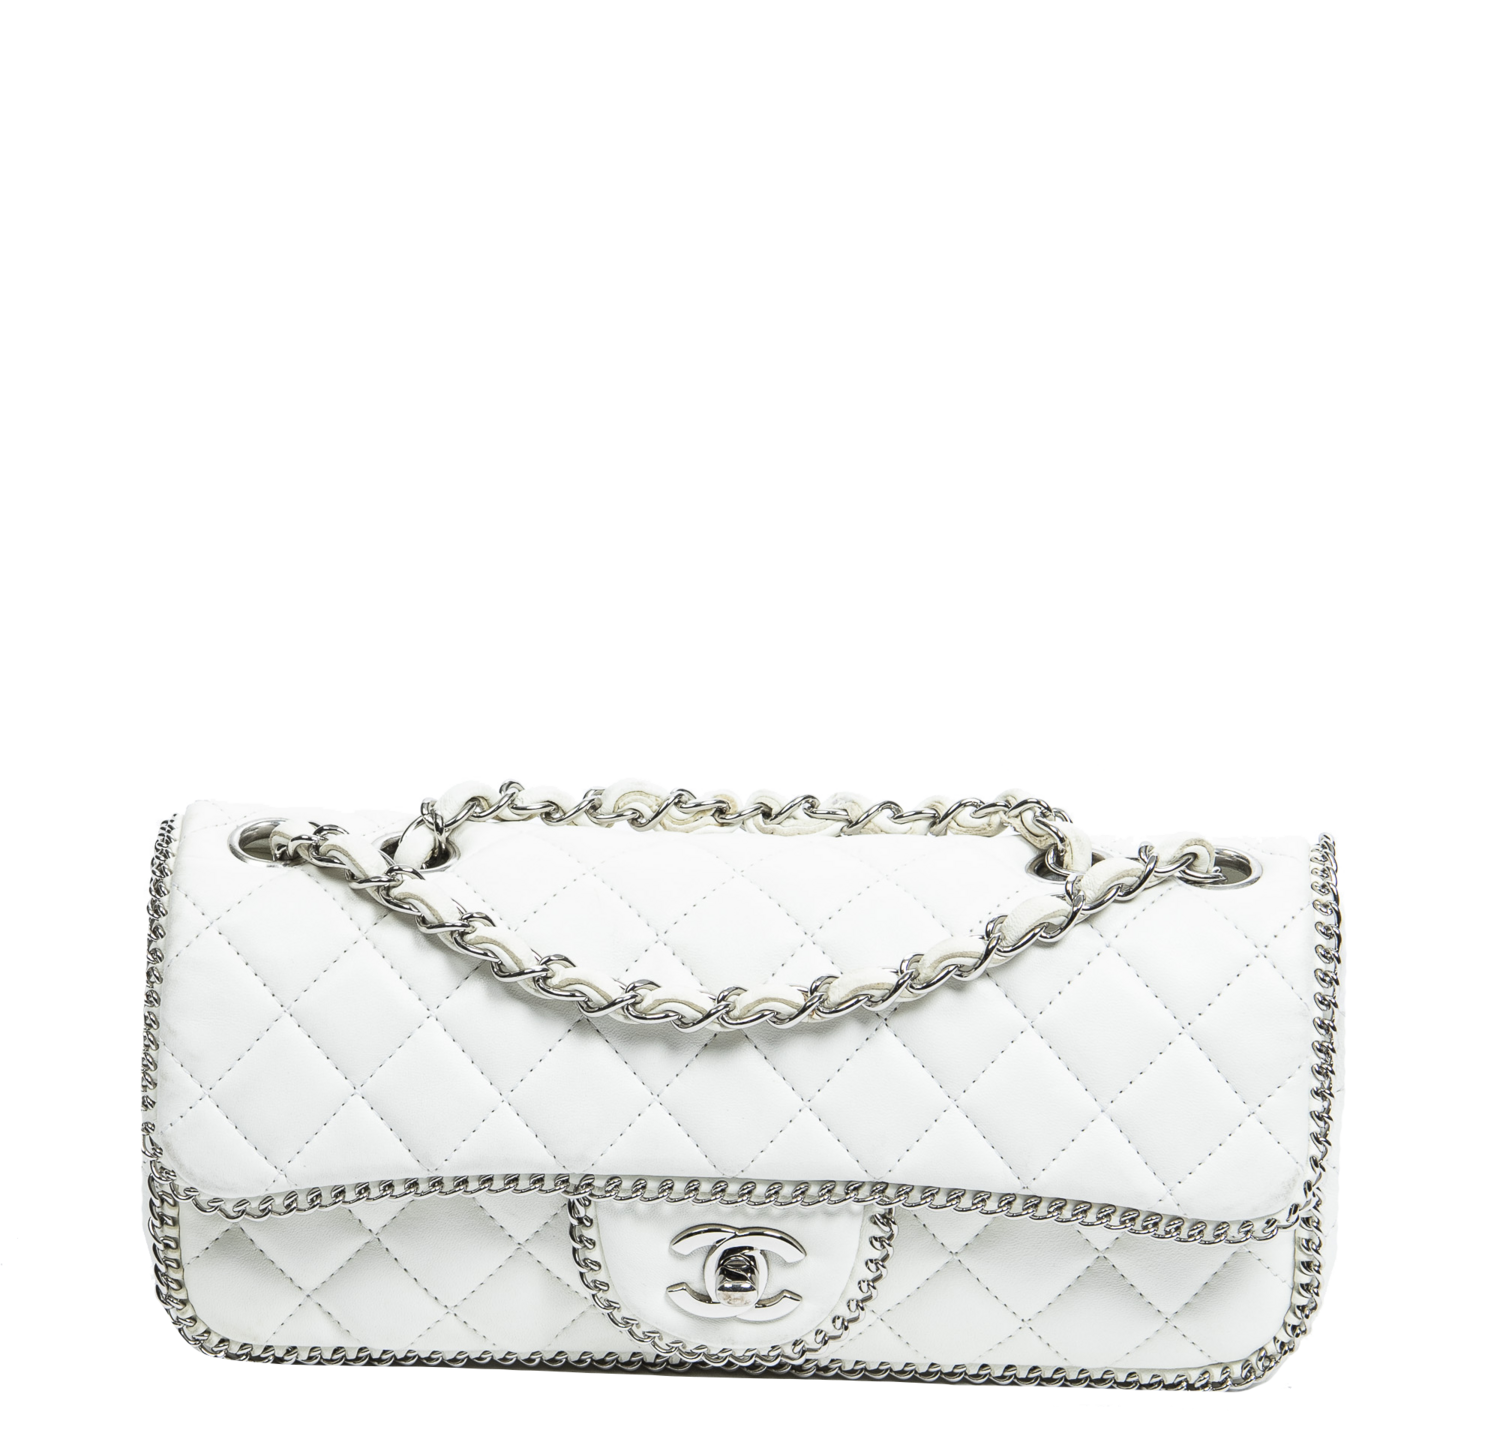 Chanel White Limited Edition Chain East West Flap Bag